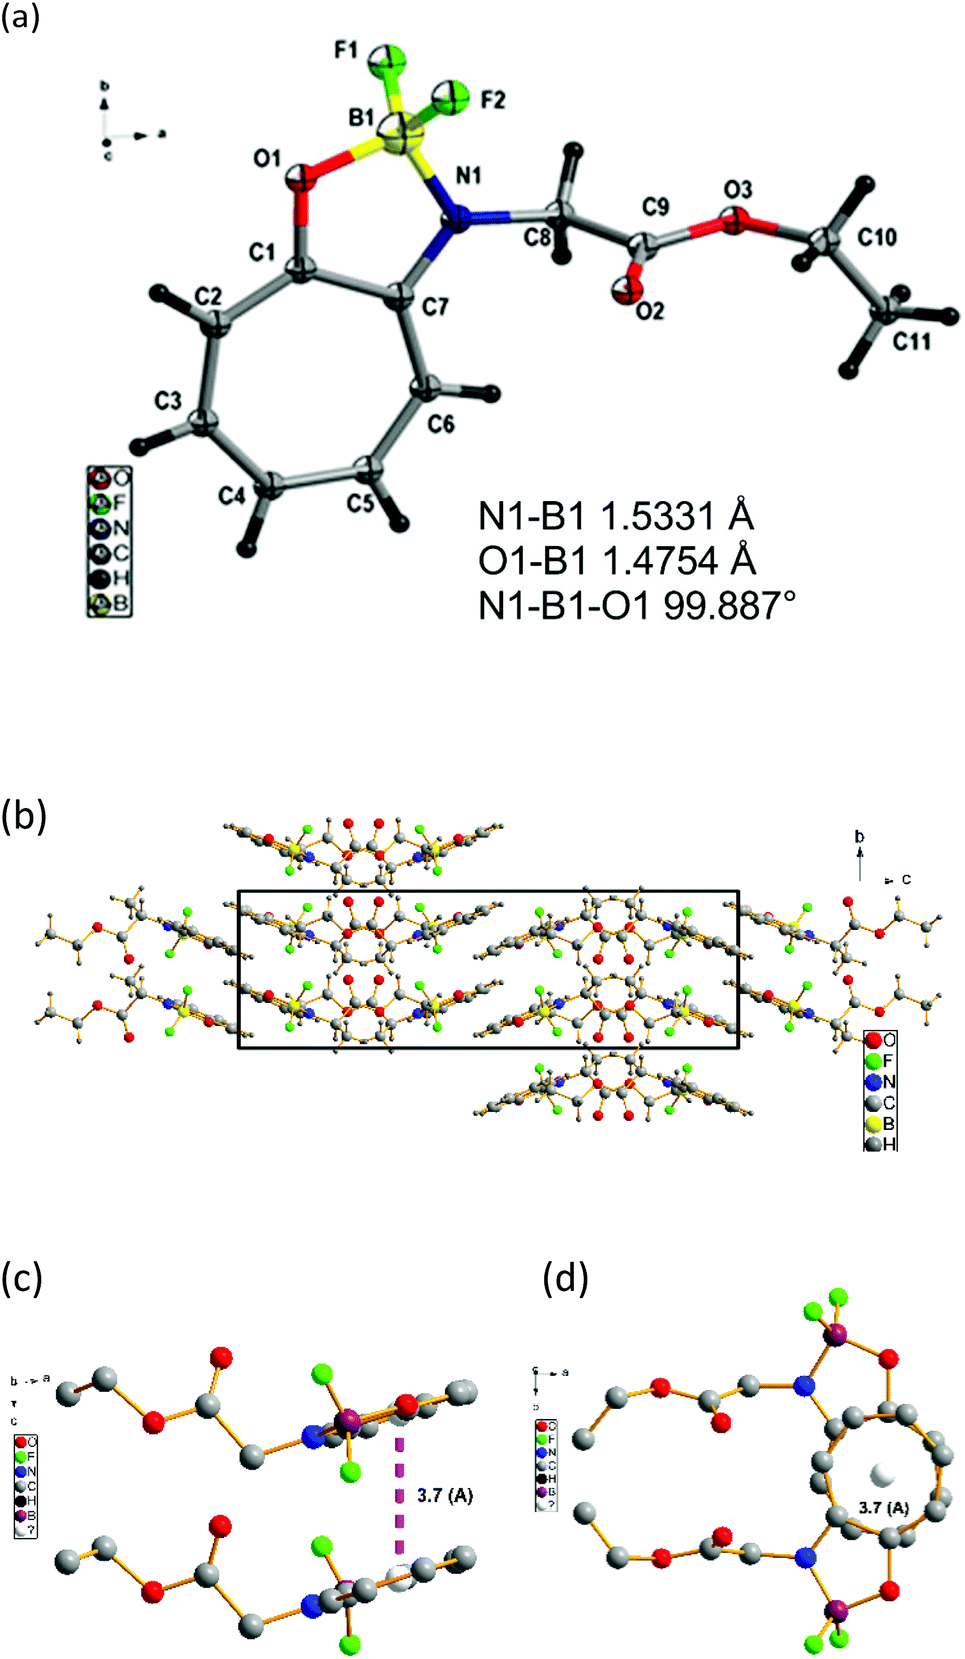 Bodipy Analogues Synthesis And Photophysical Studies Of Difluoro Boron Complexes From 2 Aminotropone Scaffolds Through N O Chelation Organic Biomolecular Chemistry Rsc Publishing Doi 10 1039 C9oba